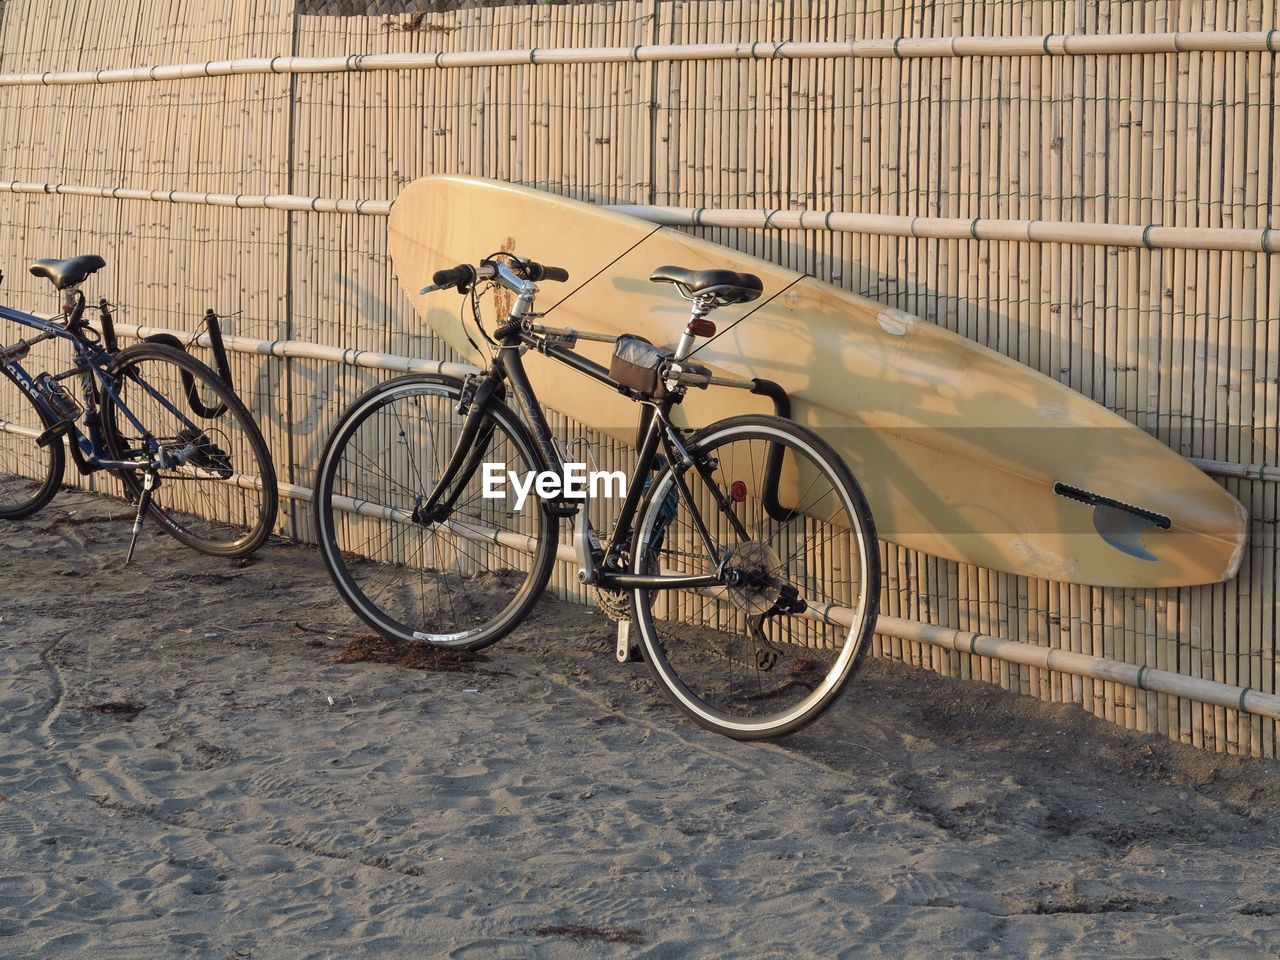 Bicycles with surfboard at beach by wooden fence